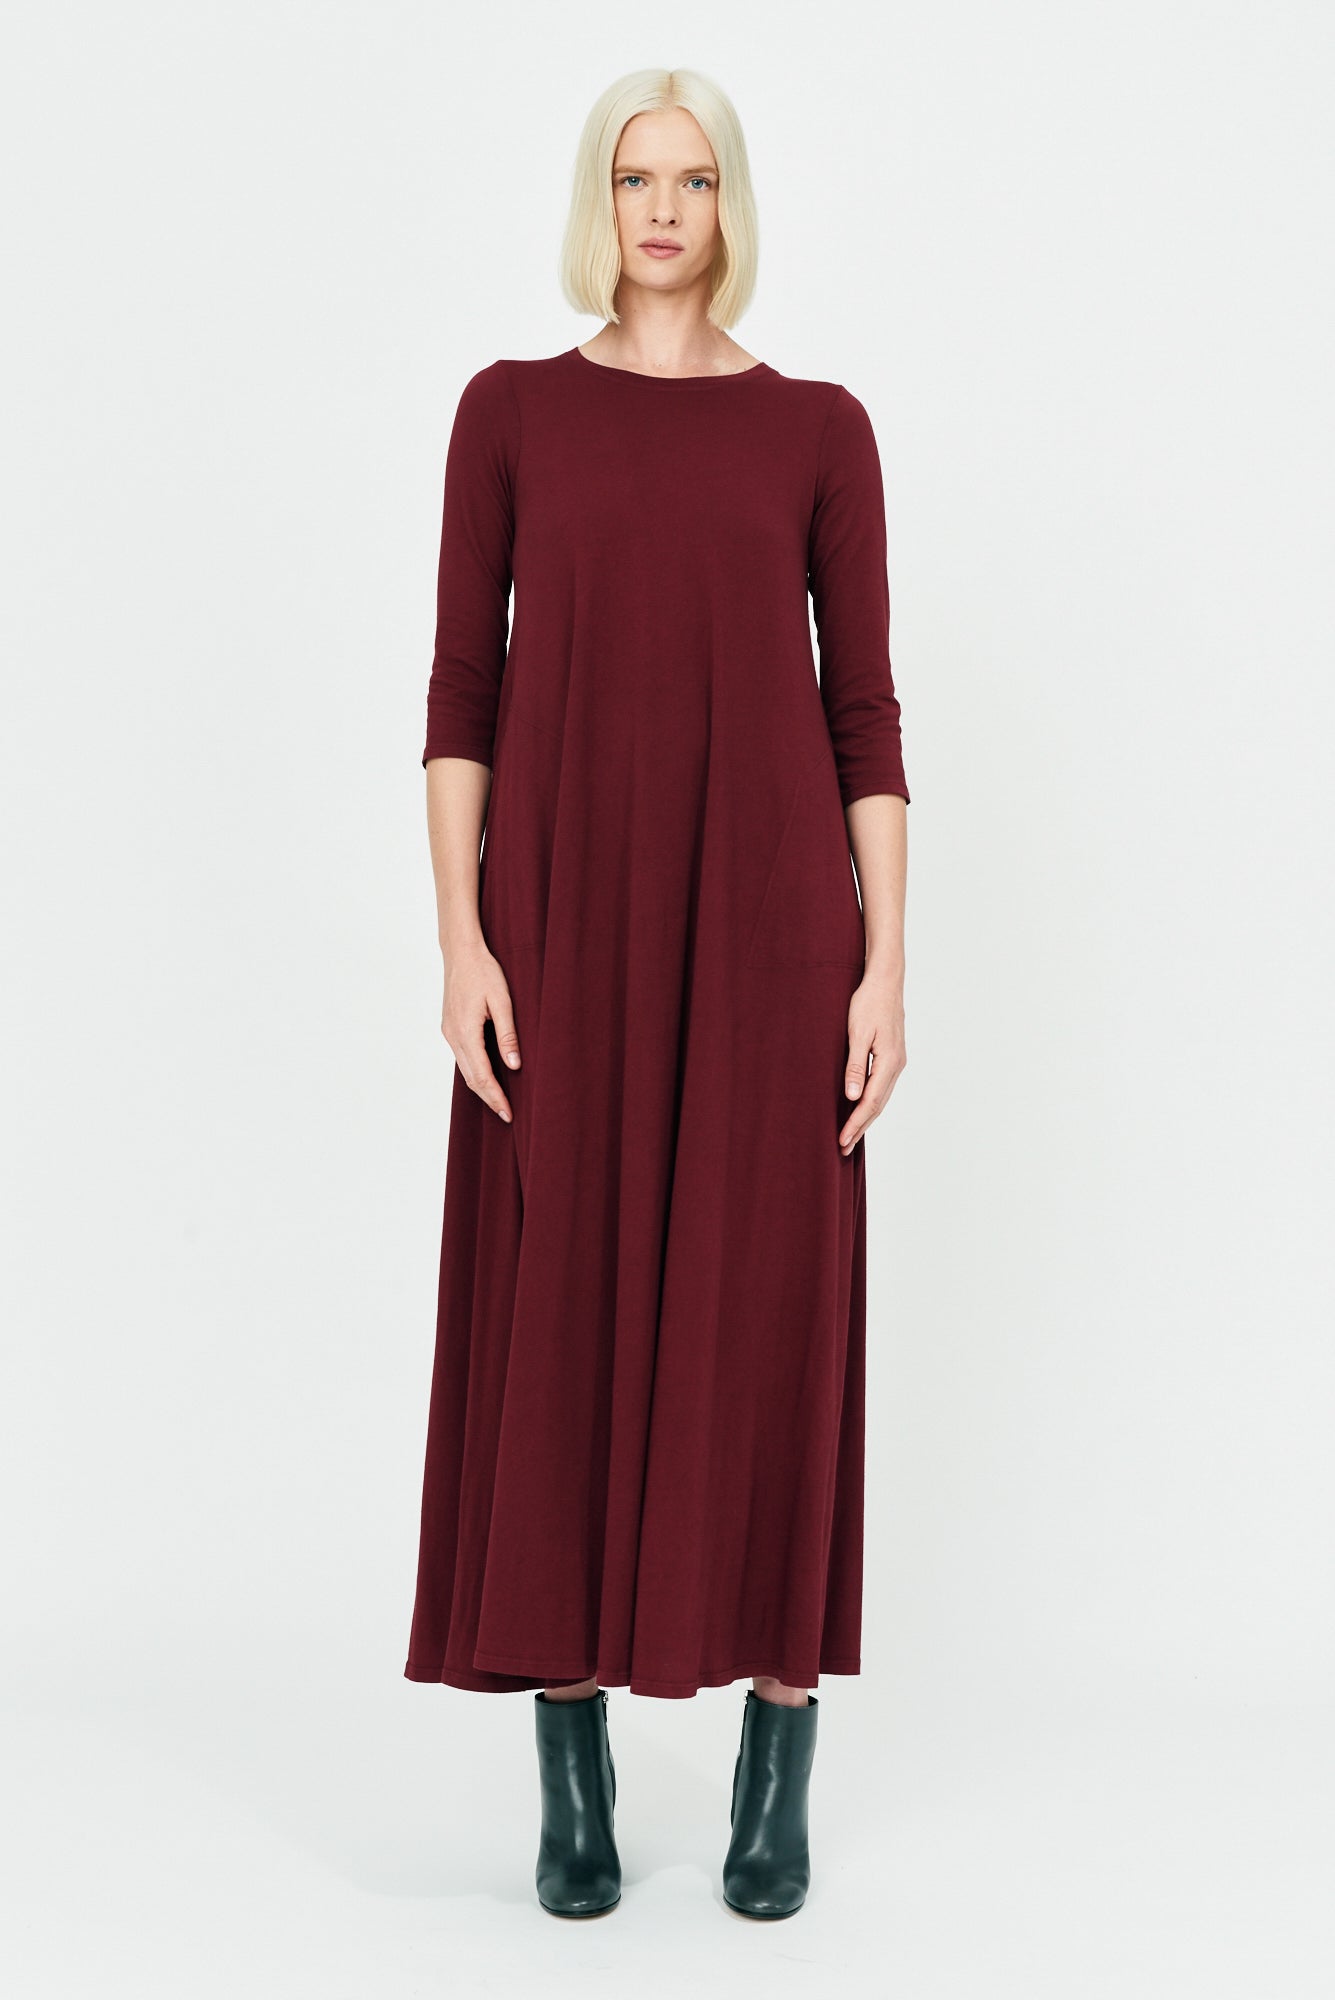 Sienna Classic Jersey Drama Maxi Dress Full Front View